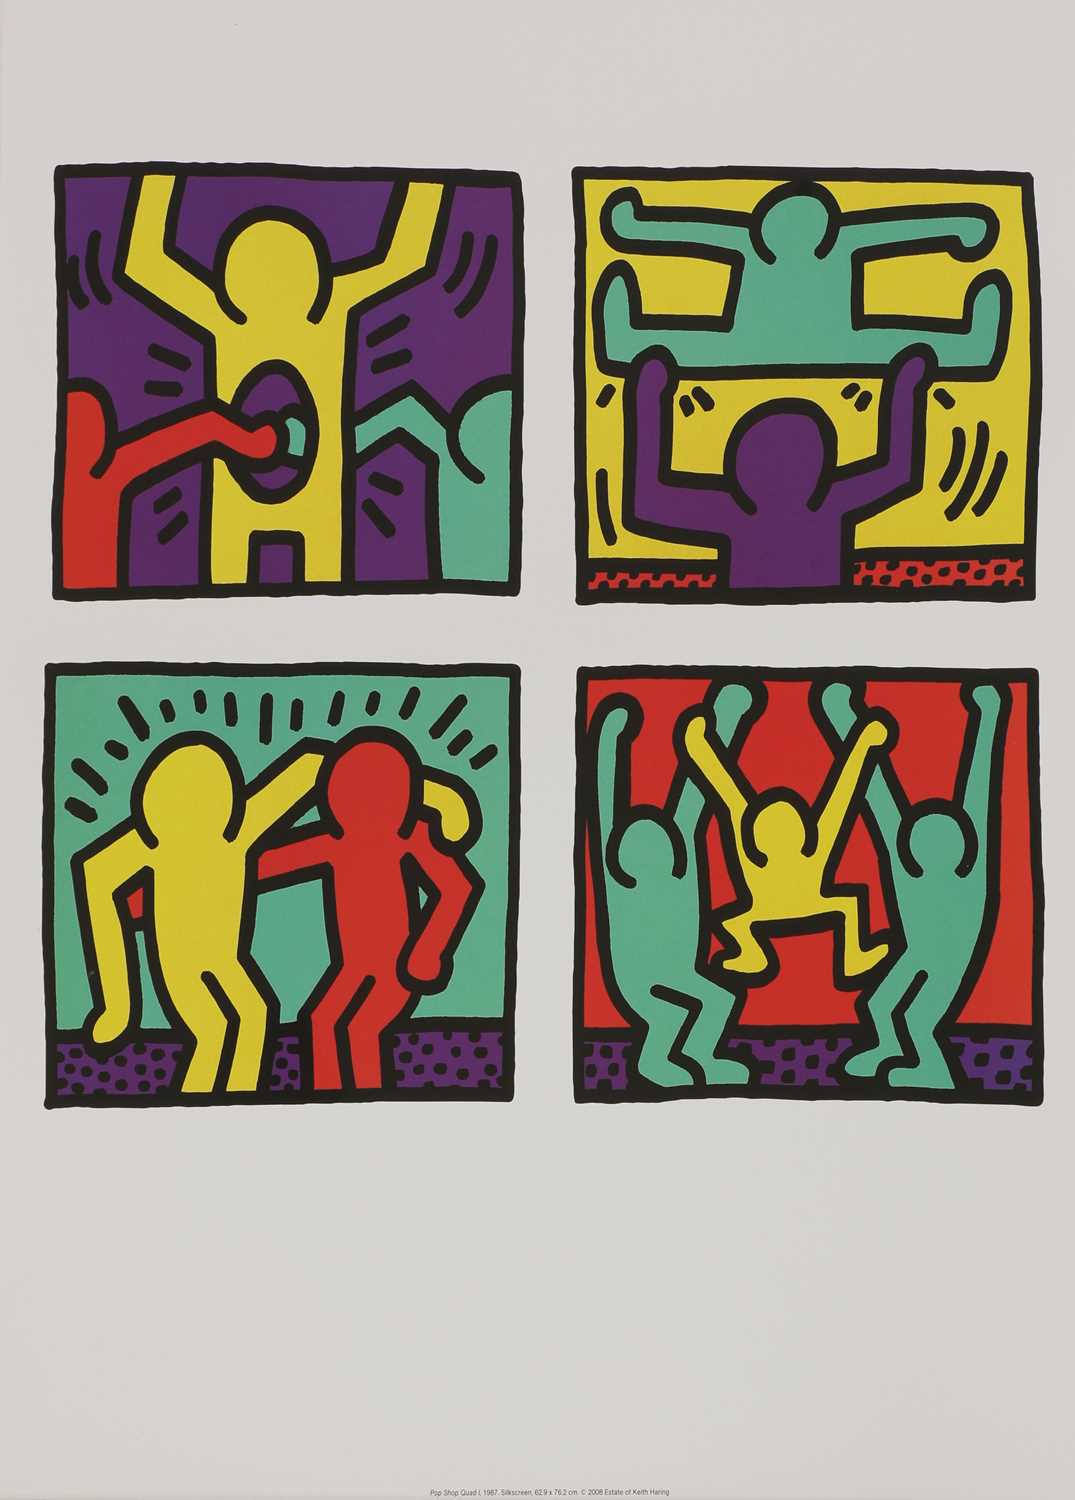 After Keith Haring